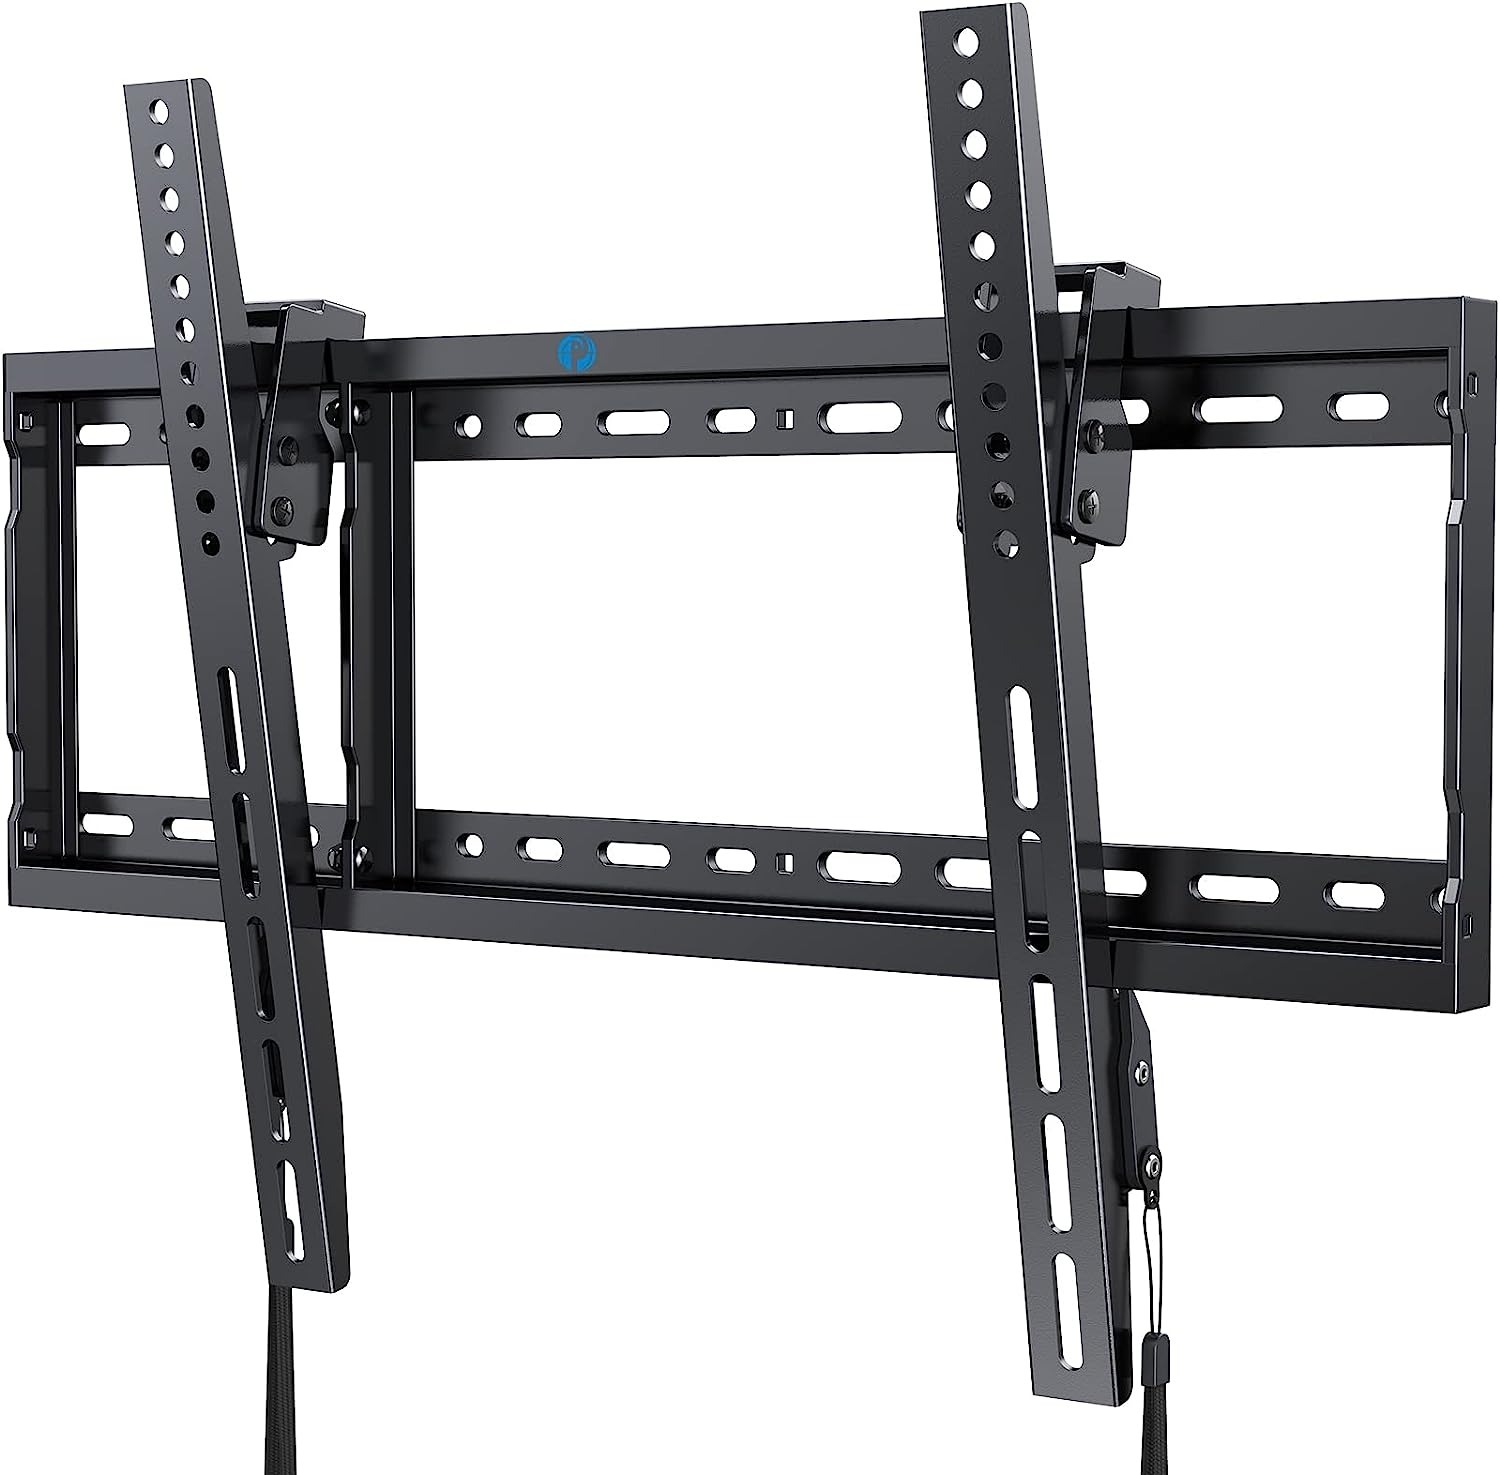 Pipishell Tilting TV Wall Mount Bracket (for 37 -70" TV's / Up to 132-lbs) $15 + Free Shipping